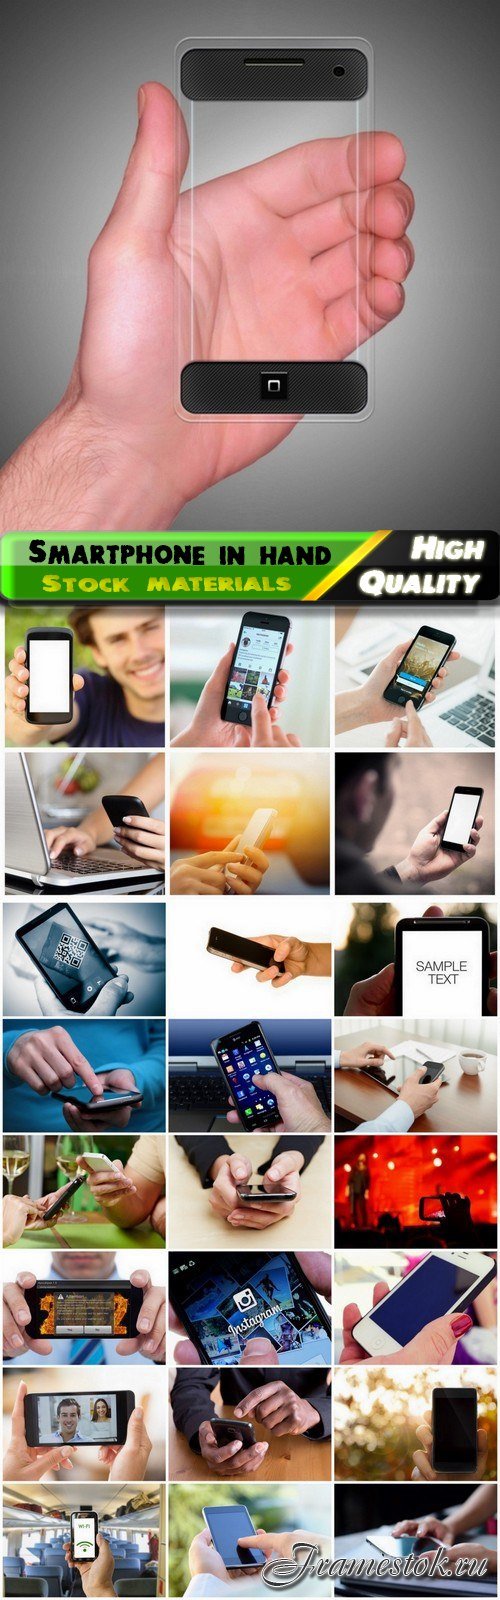 People with smartphone and cellphone in hand - 25 HQ Jpg